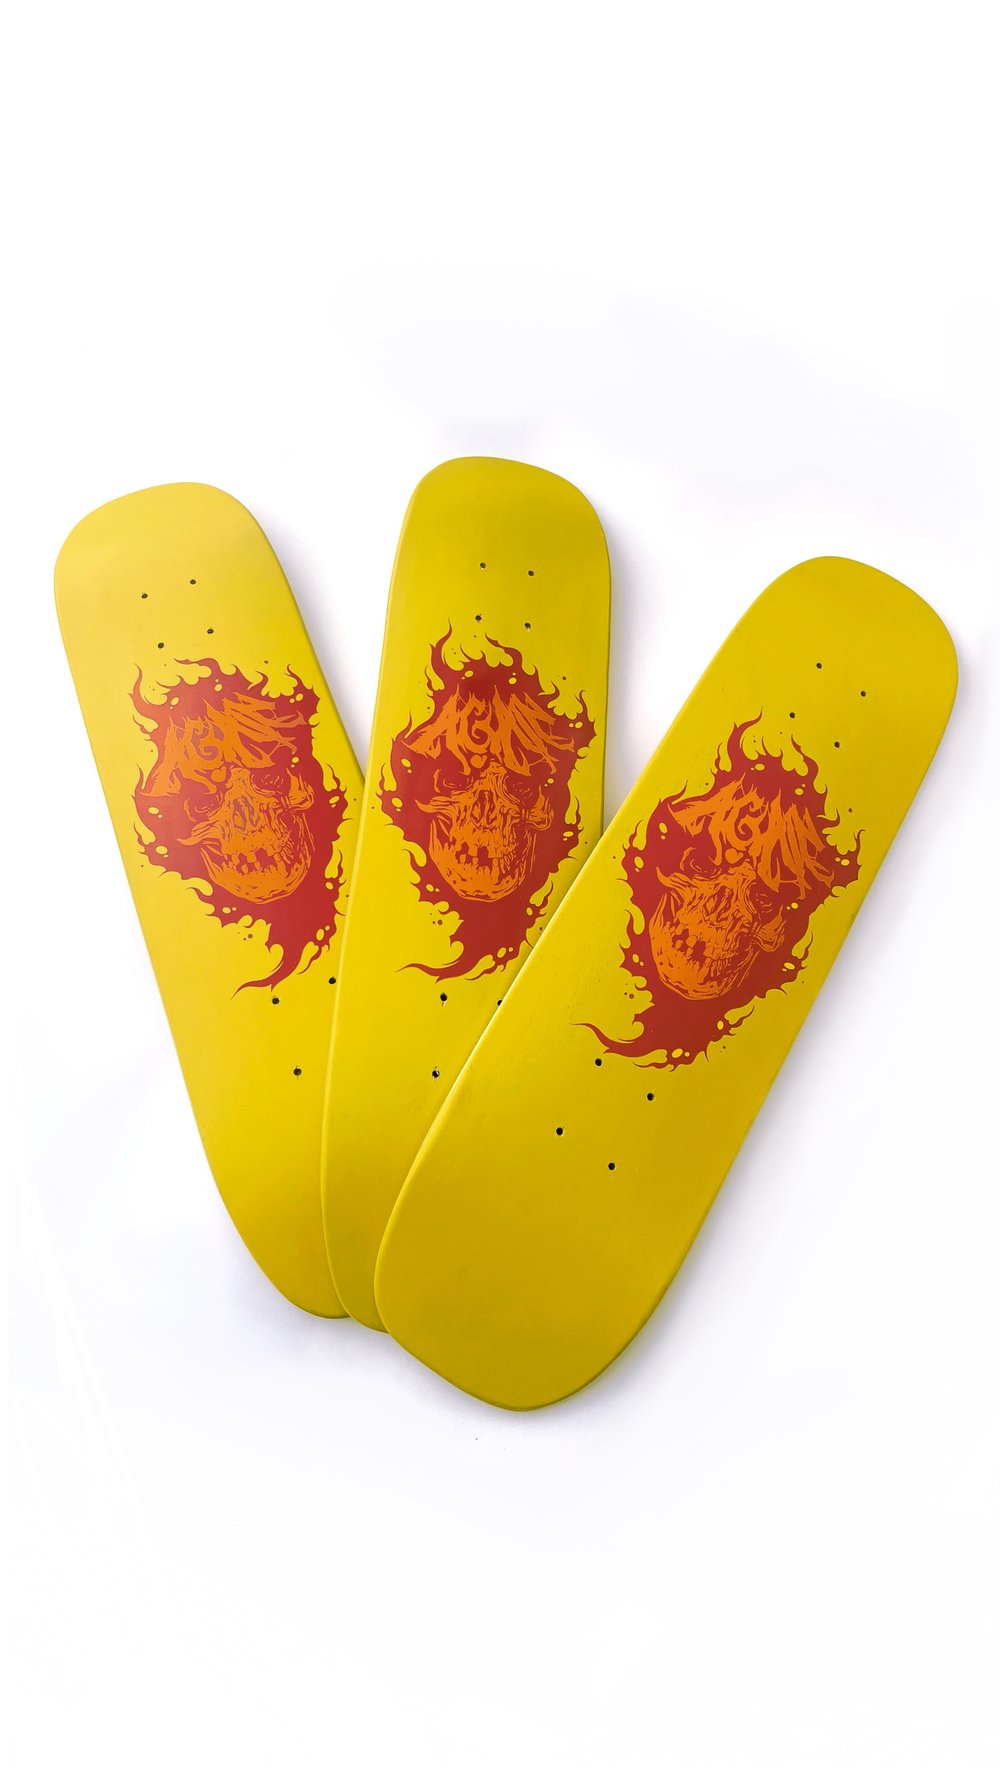 FREESTYLE SKATEBOARD "UNDEFINED REASON" LIMITED EDITION BUNDLE YELLOW 7.5